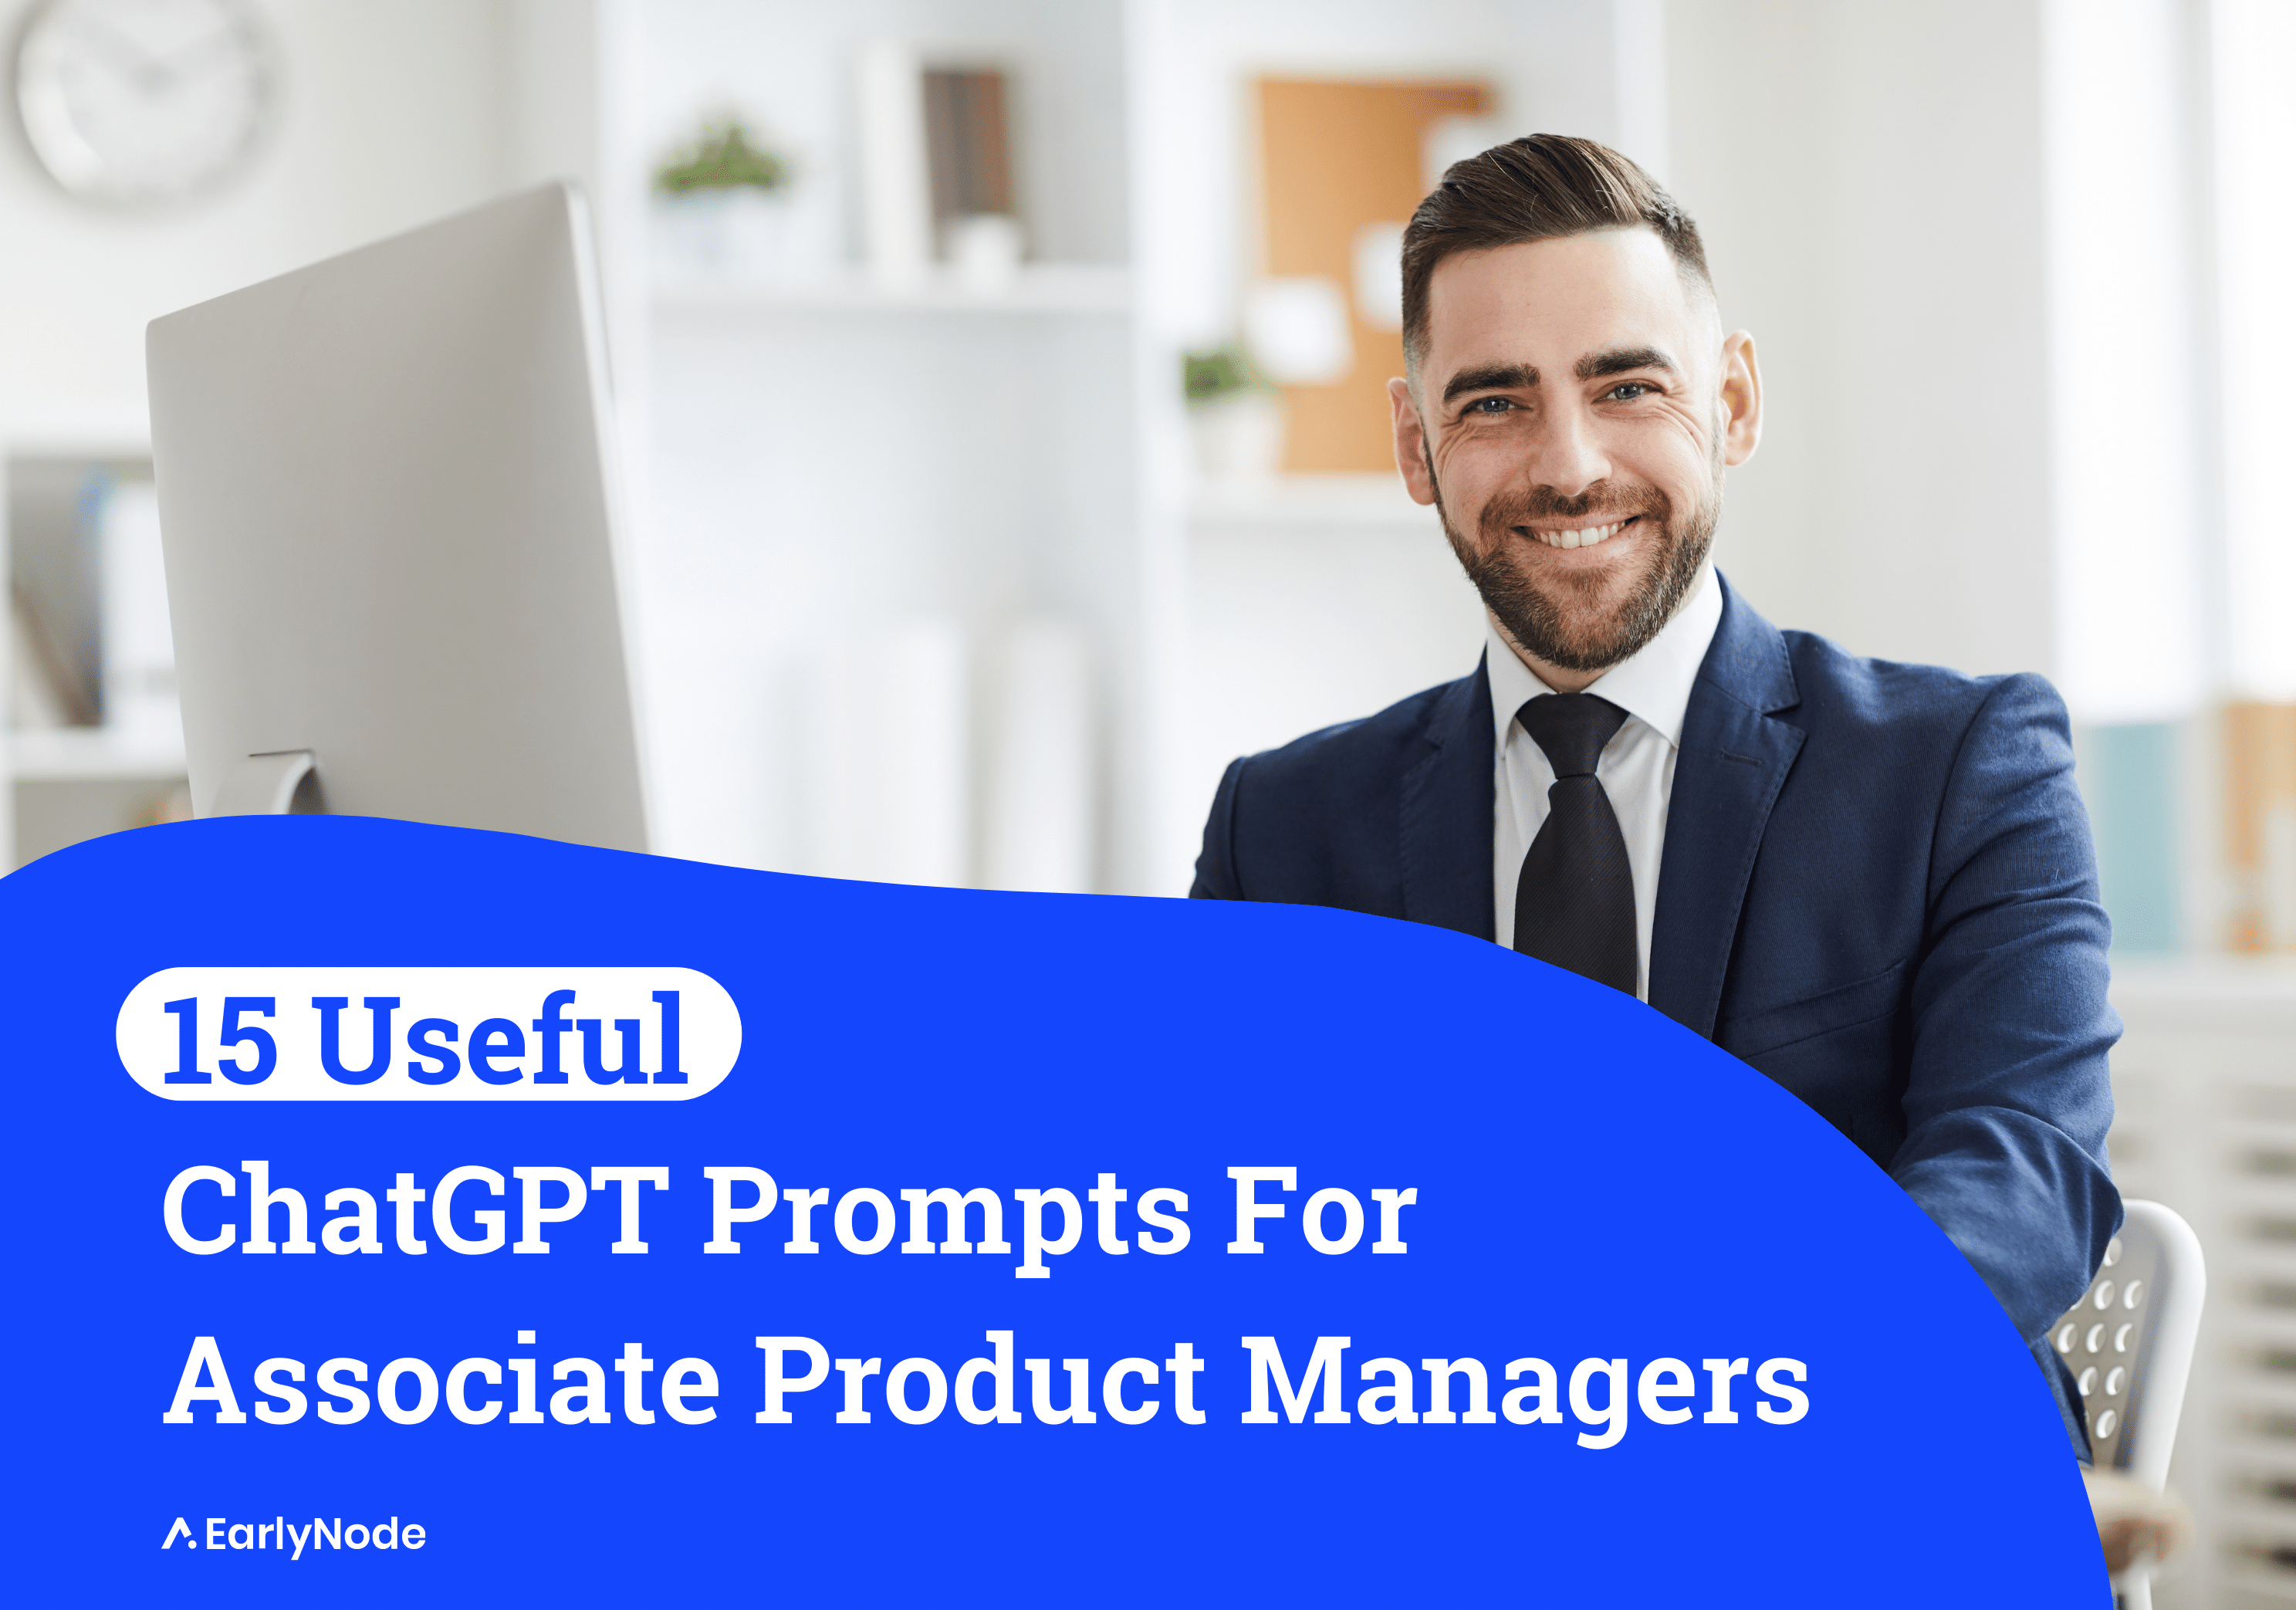 15 Tailored ChatGPT Prompts For Associate Product Managers